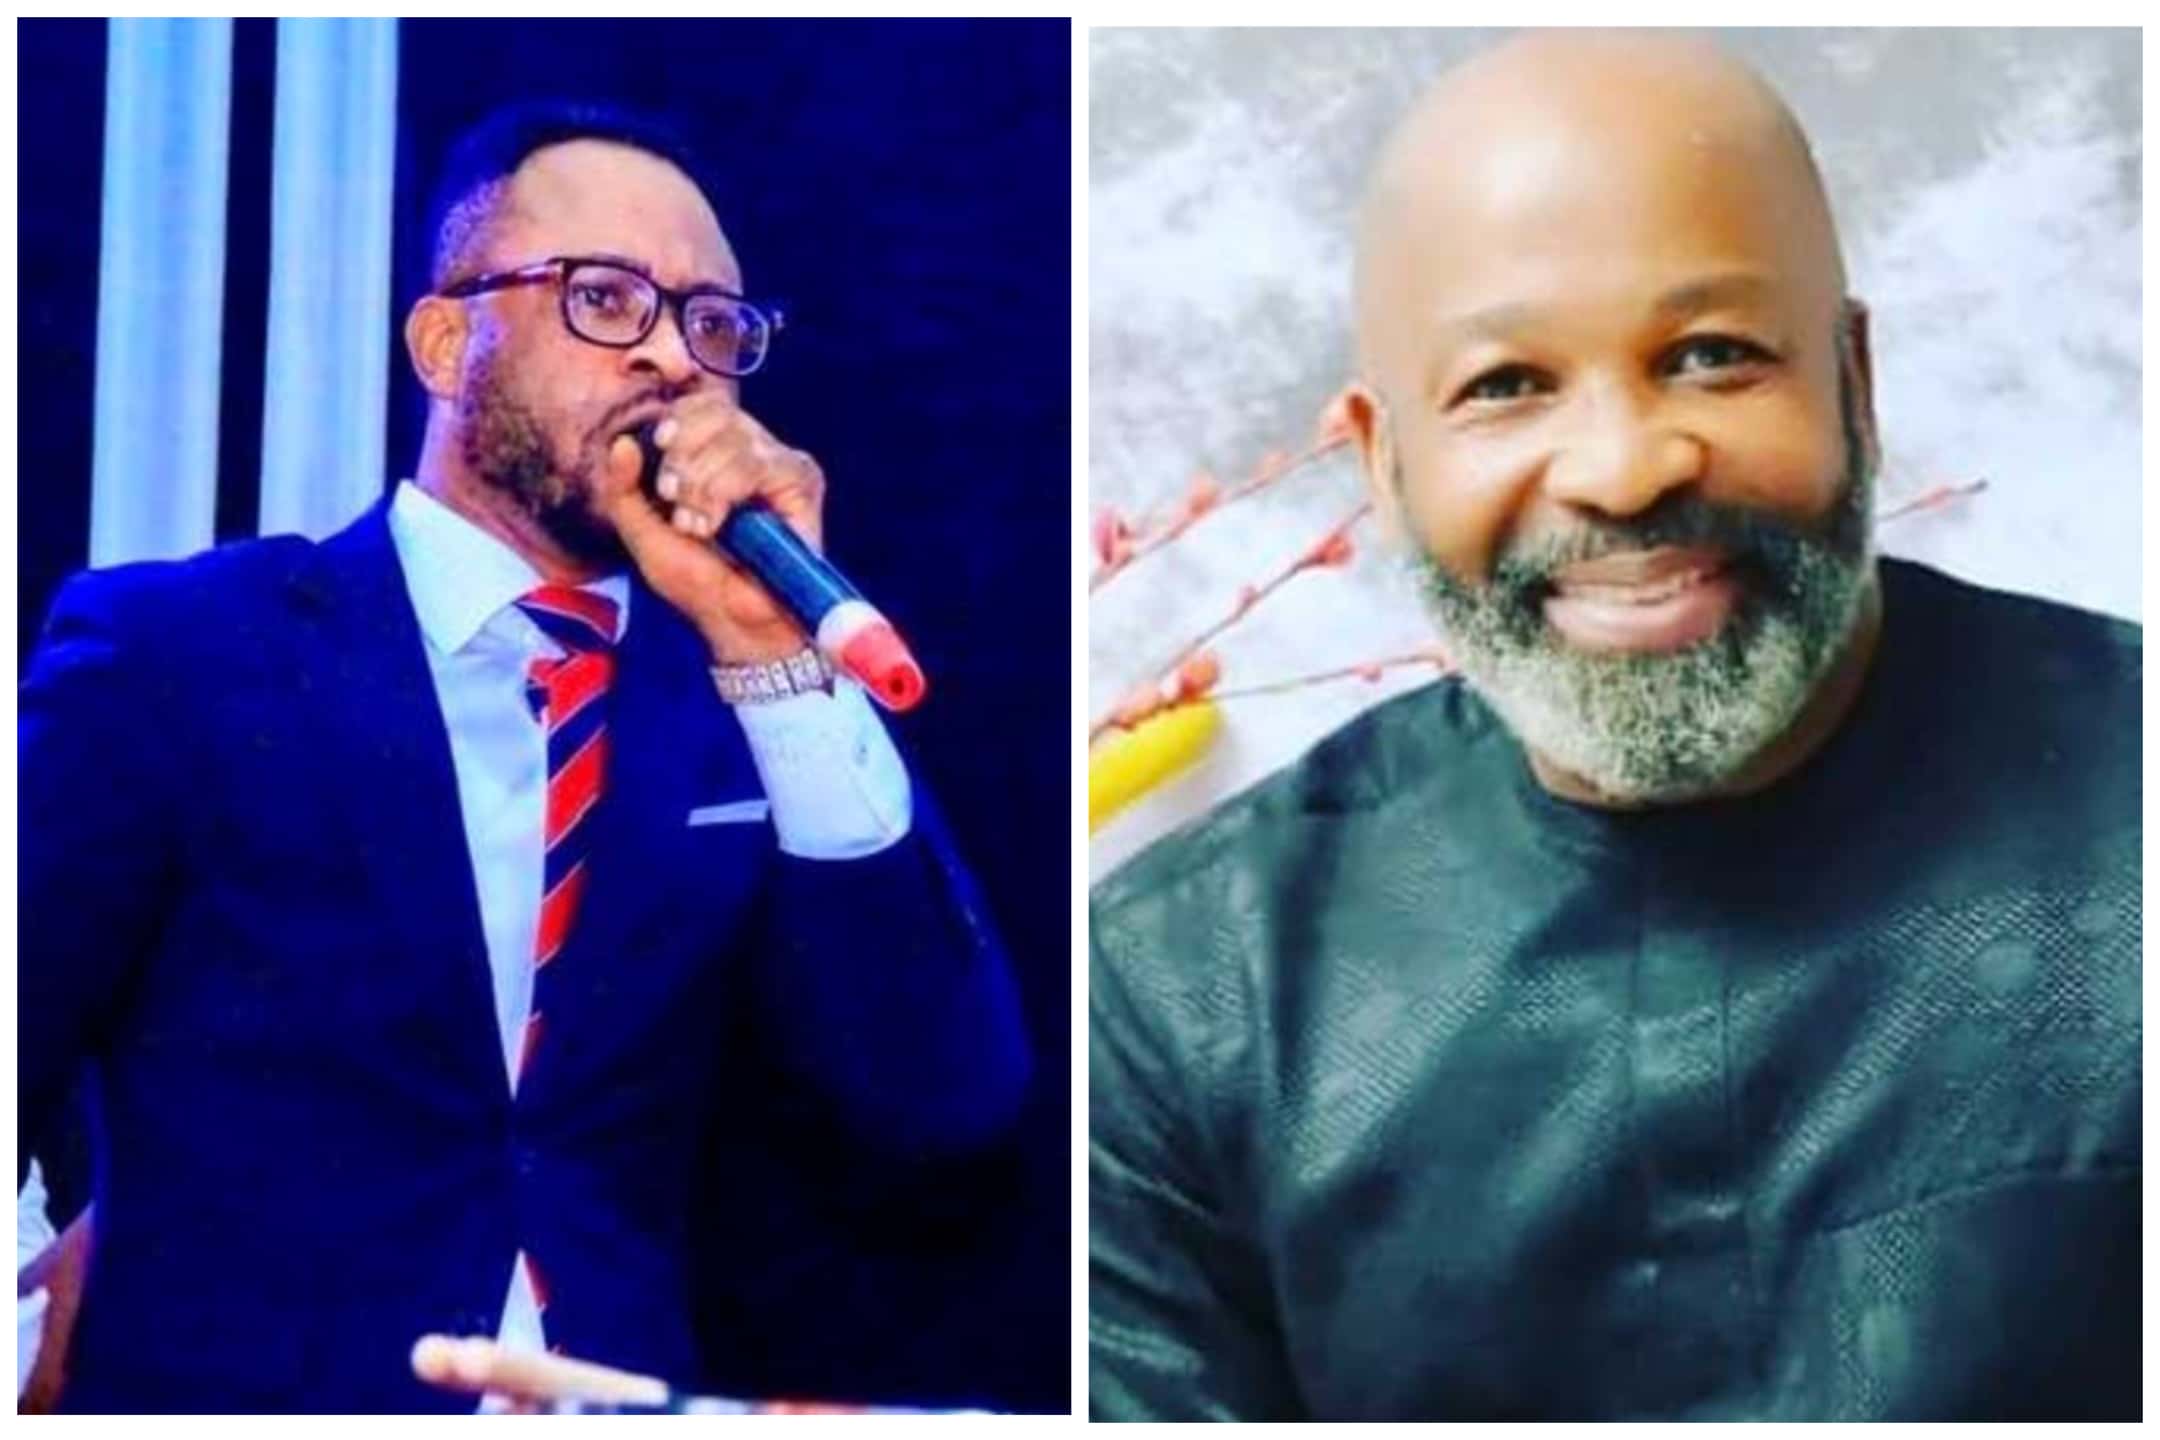 Yemi solade and Pastor